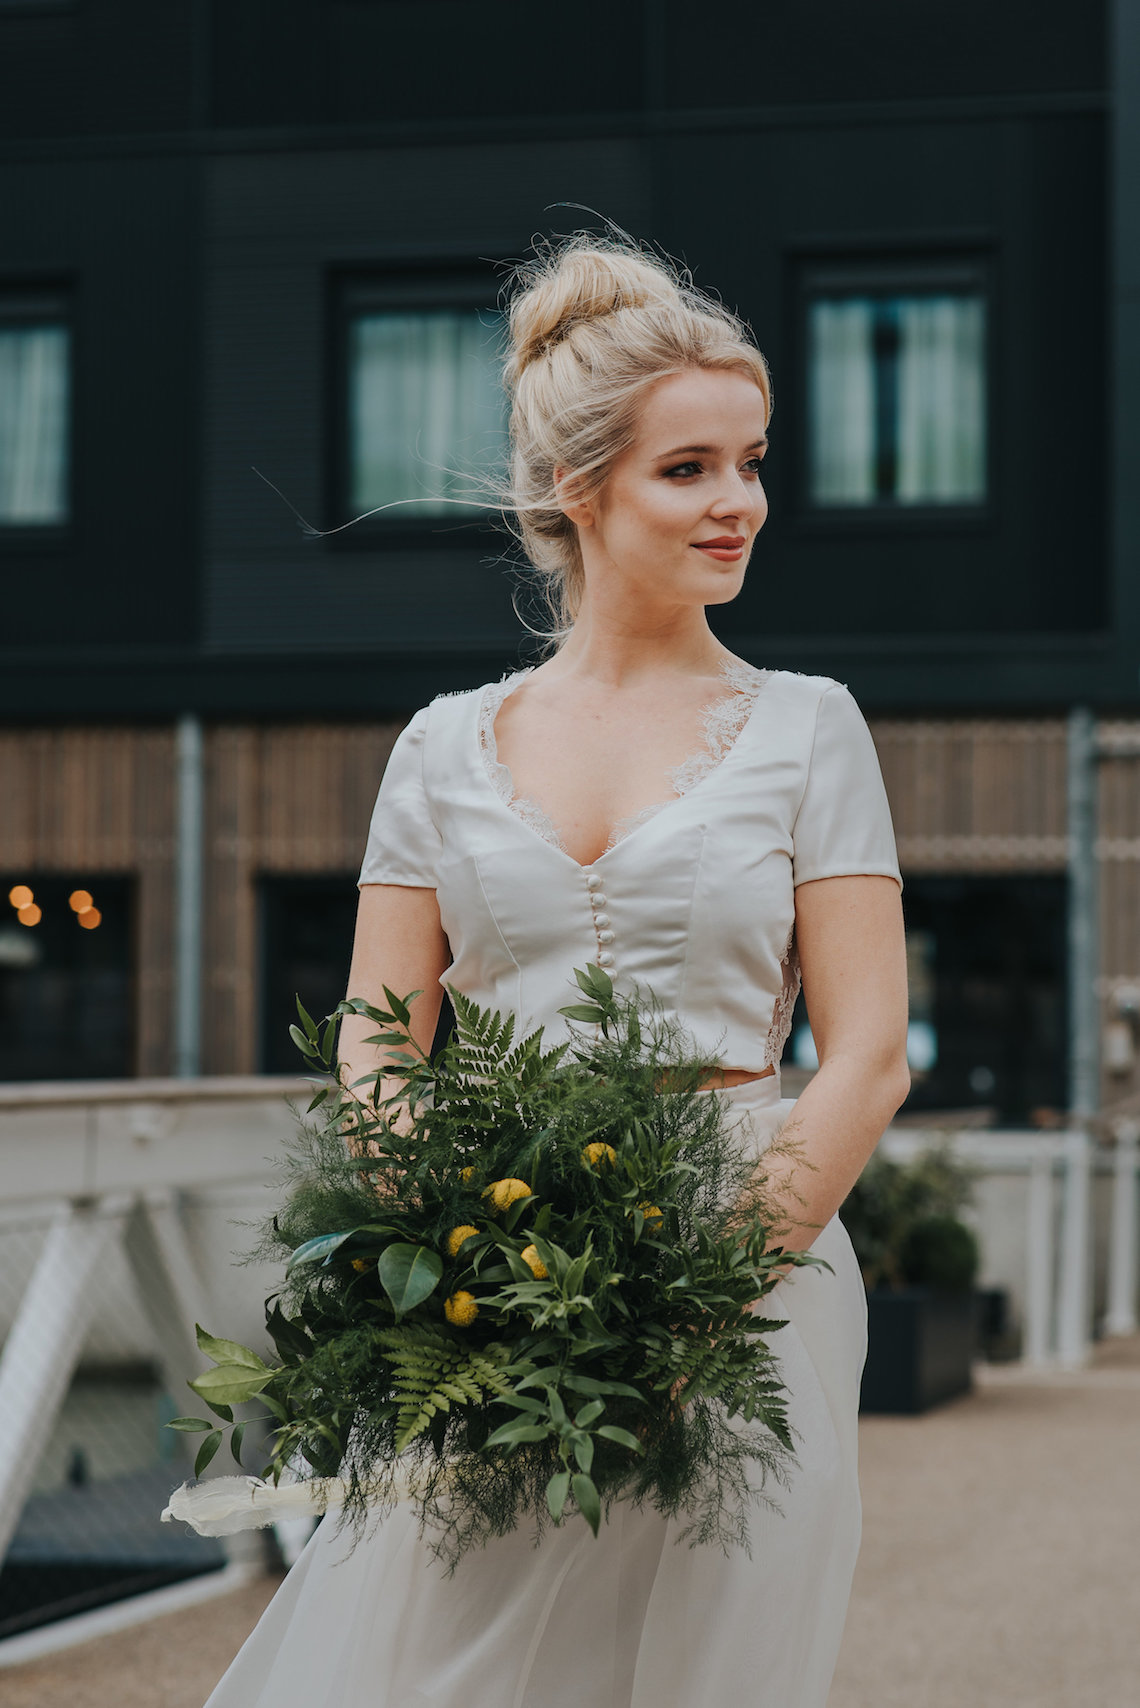 Modern Industrial London Wedding Inspiration With Succulents | Remain in the Light Photography 21